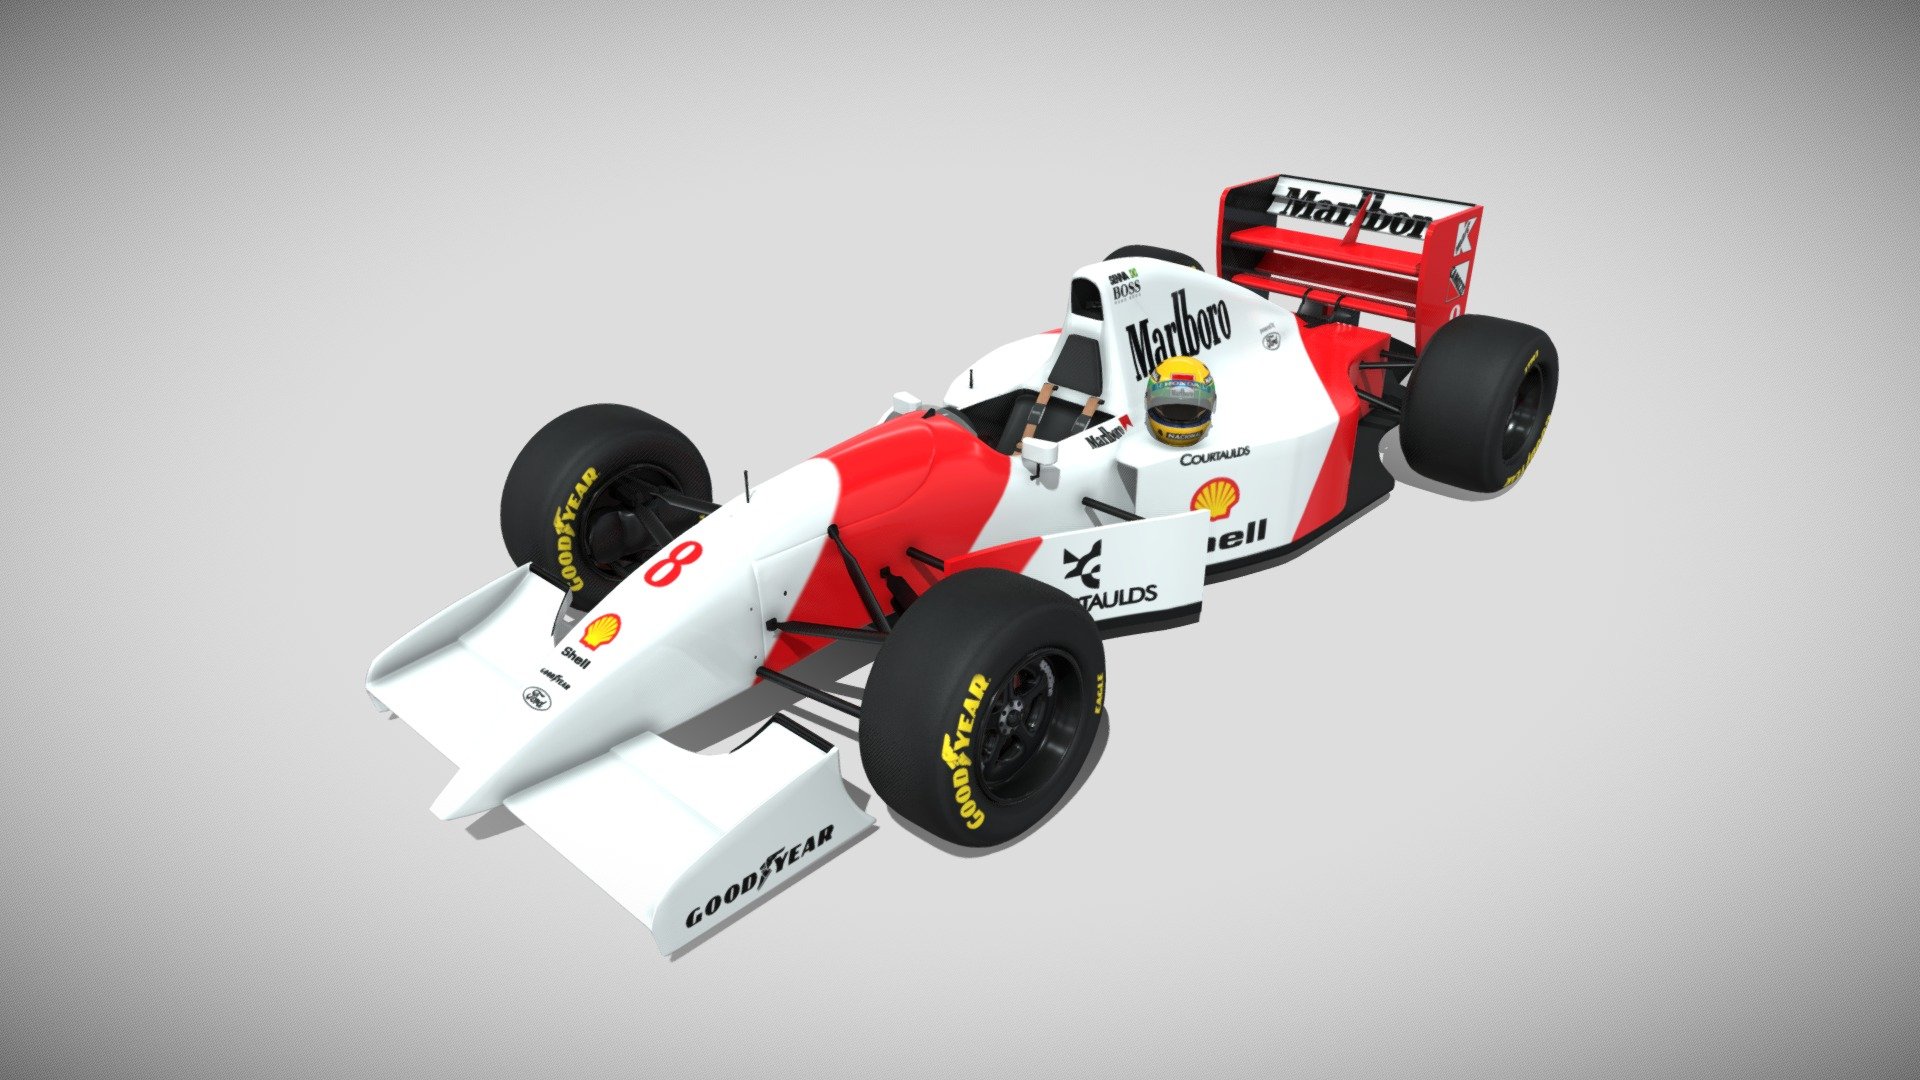 A model of Ayrton Senna's 1993 McLaren and helmet with Marlboro livery on both.
Everything is textured as factory new so you can apply dirt and wear yourself as your race session moves along :)

There are 14 material slots with 2k/4k textures (albedo, roughness, metalness, normal, AO).
To alow for easy animation all car elements are grouped and parented logically and all moveable parts are not mirrored so they can work independetly.

Modelled in Blender, textured in Substance Painter and rendered in Marmoset Toolbag 3.

Feel free to contact me for support and enjoy your purchase! - Senna's McLaren MP4-8 - Buy Royalty Free 3D model by ViceForce (@dominik.strok30) 3d model